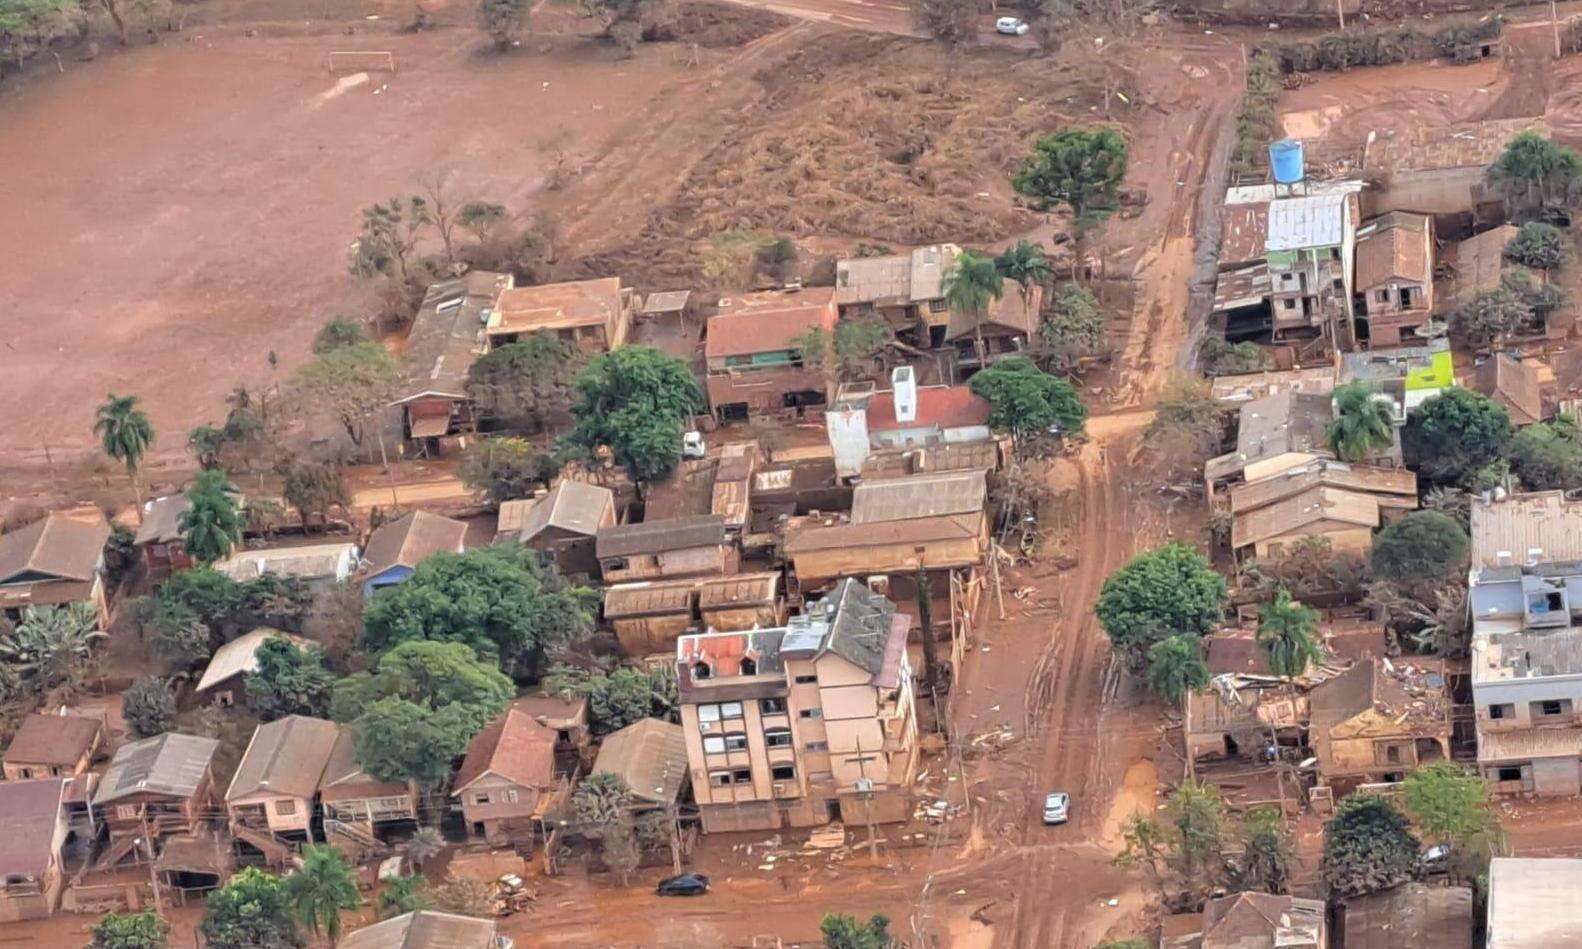 Aerial view of severe floods in the state of Rio Grande do Sul, Brazil.